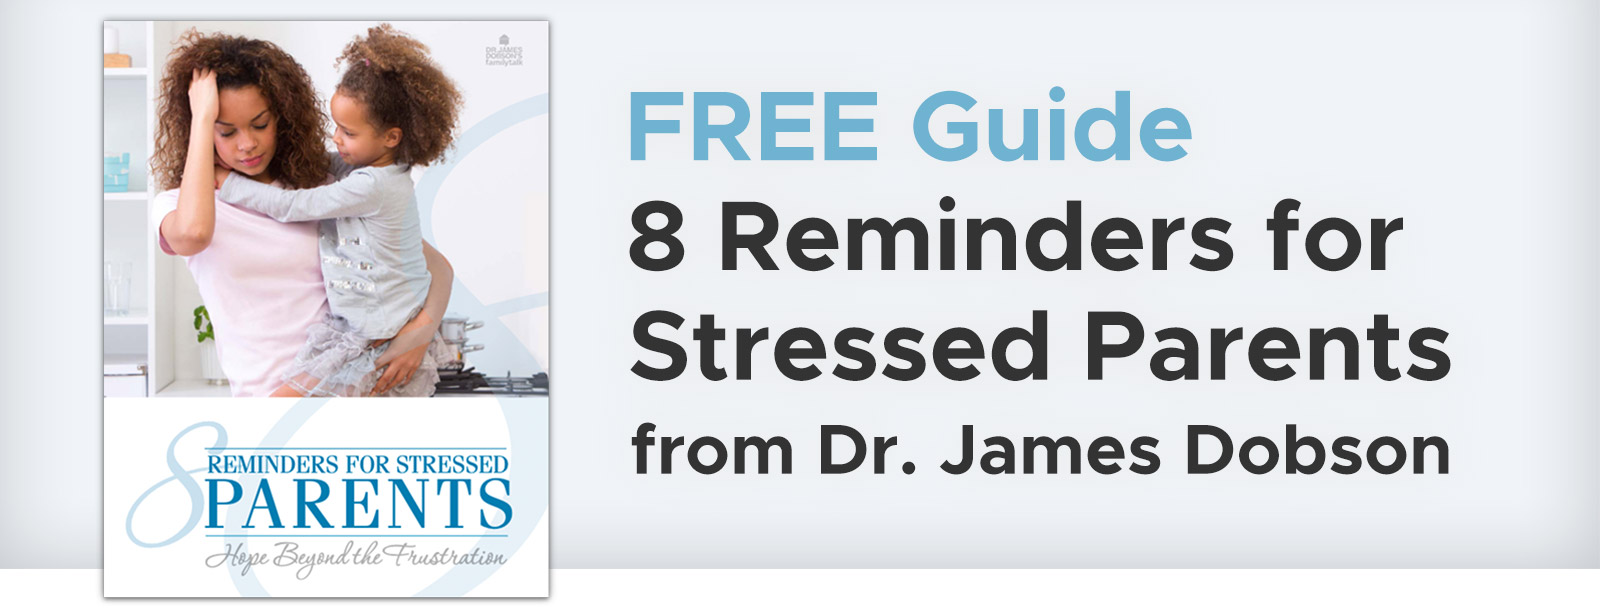 Free Guide - 8 Reminders for Stressed Parents from Dr. James Dobson